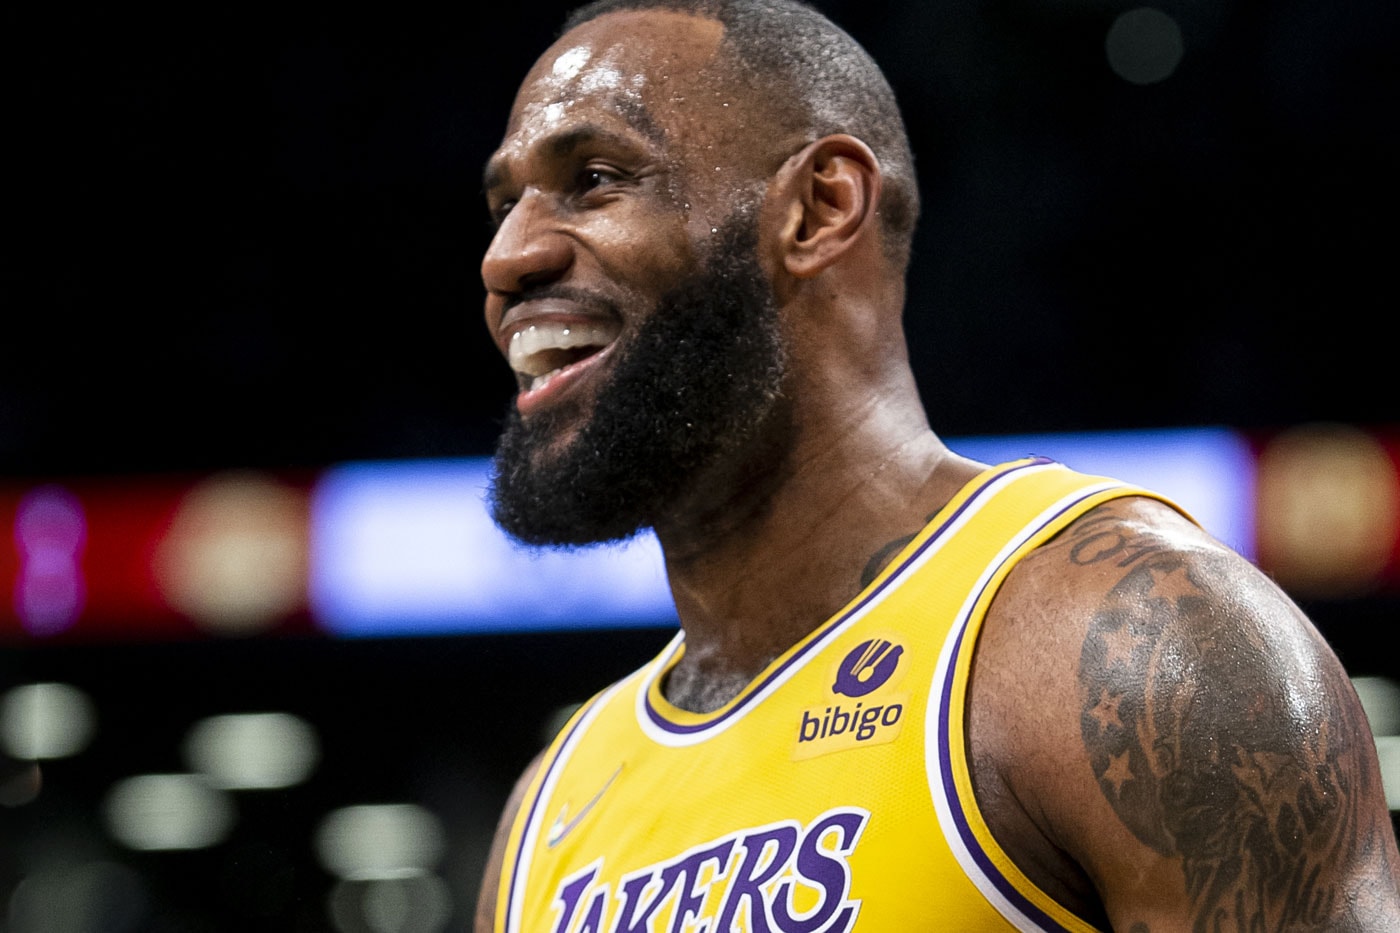 Lebron James Passes Karl Malone to Become No 2 on NBA All Time Scoring List The mailman utah jazz hall of famers 36928 points 38 points 10 rebounds six assists 36947 kareem abdul jabbar 